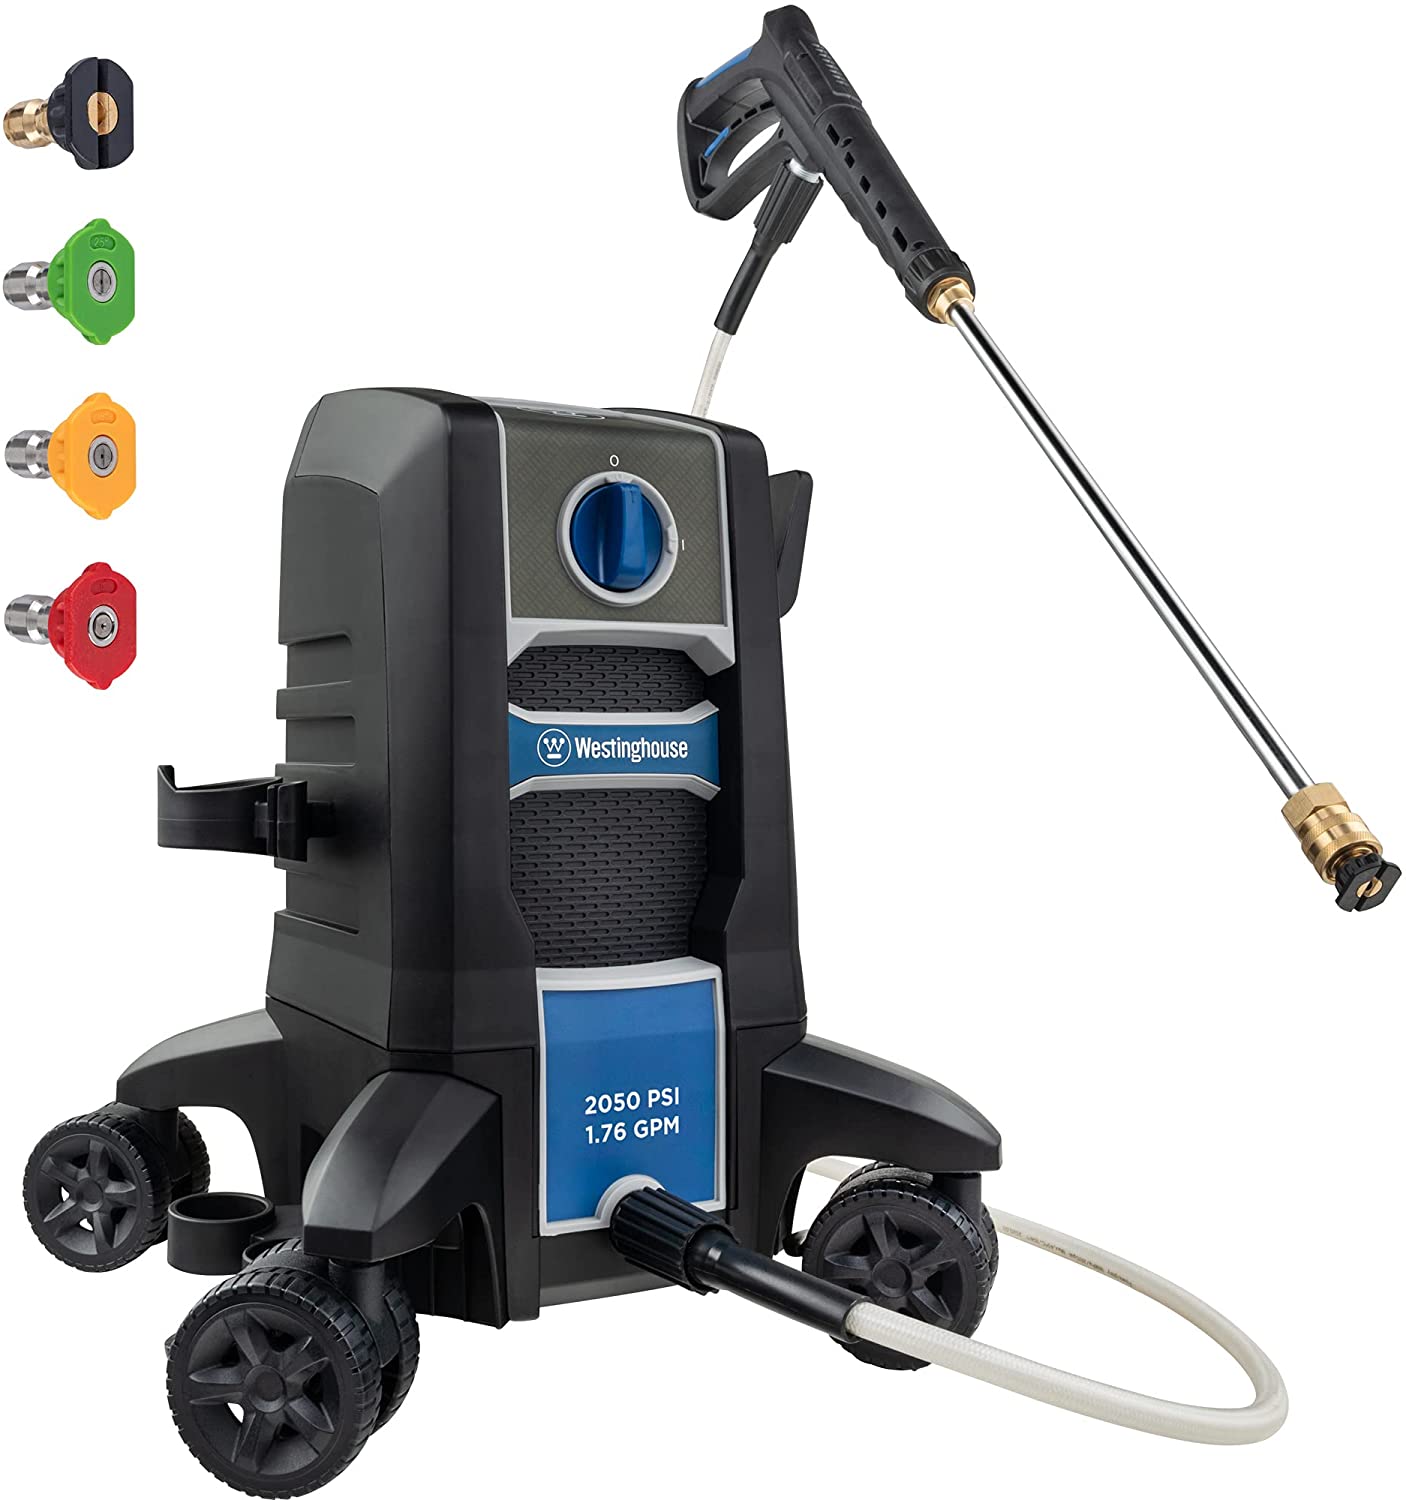 Westinghouse ePX3050 Quick-Lock Wheels Car Wash Power Washer